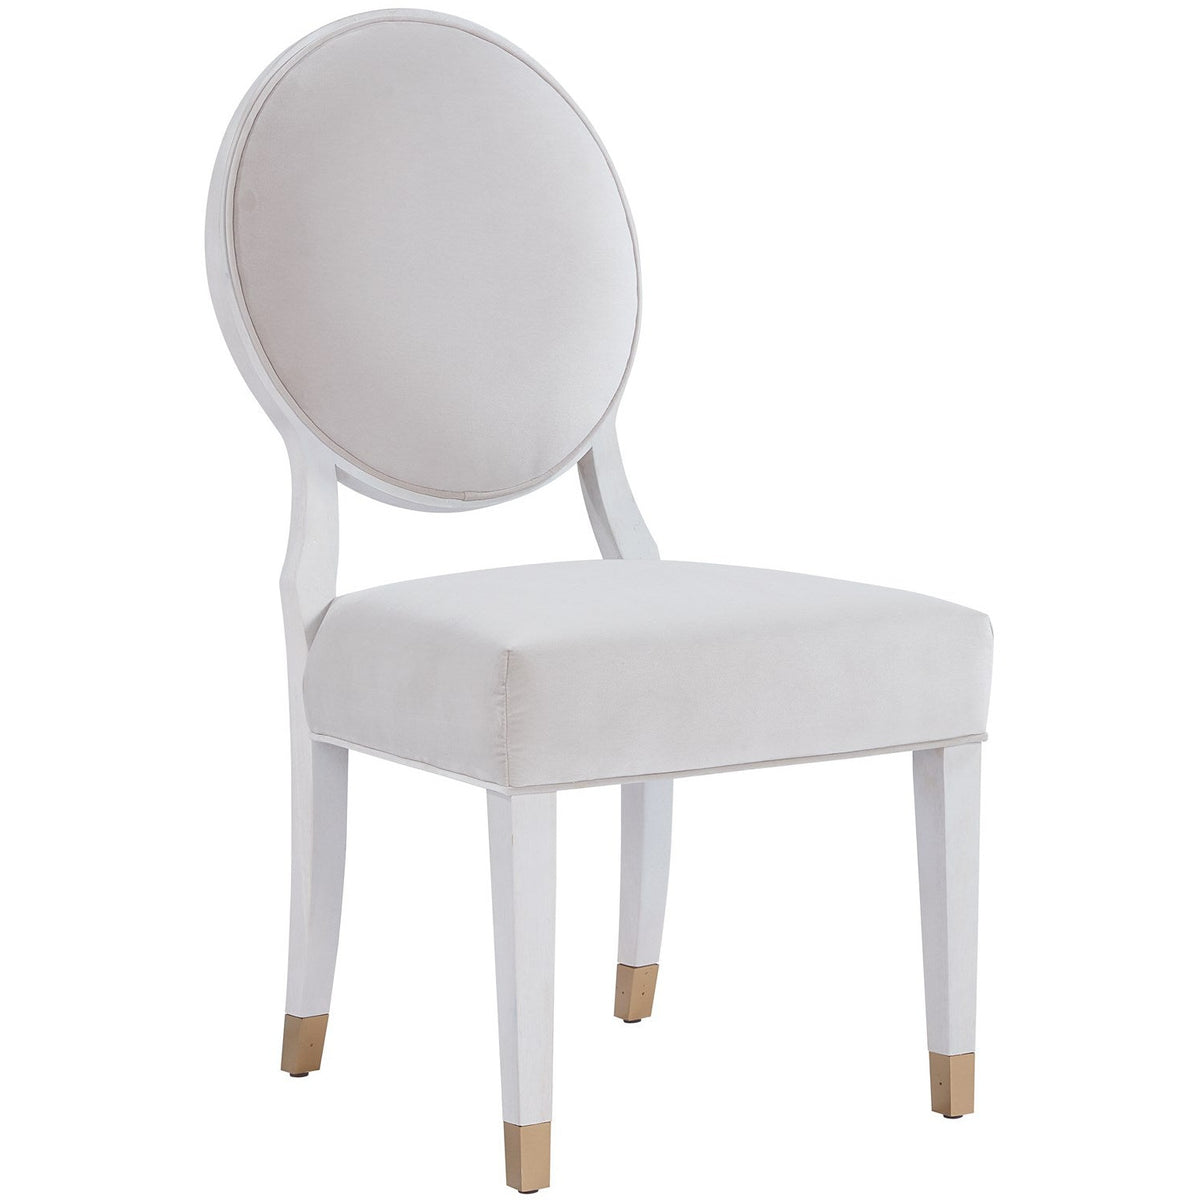 Love Joy Bliss Oval Side Chair - Be Bold Furniture